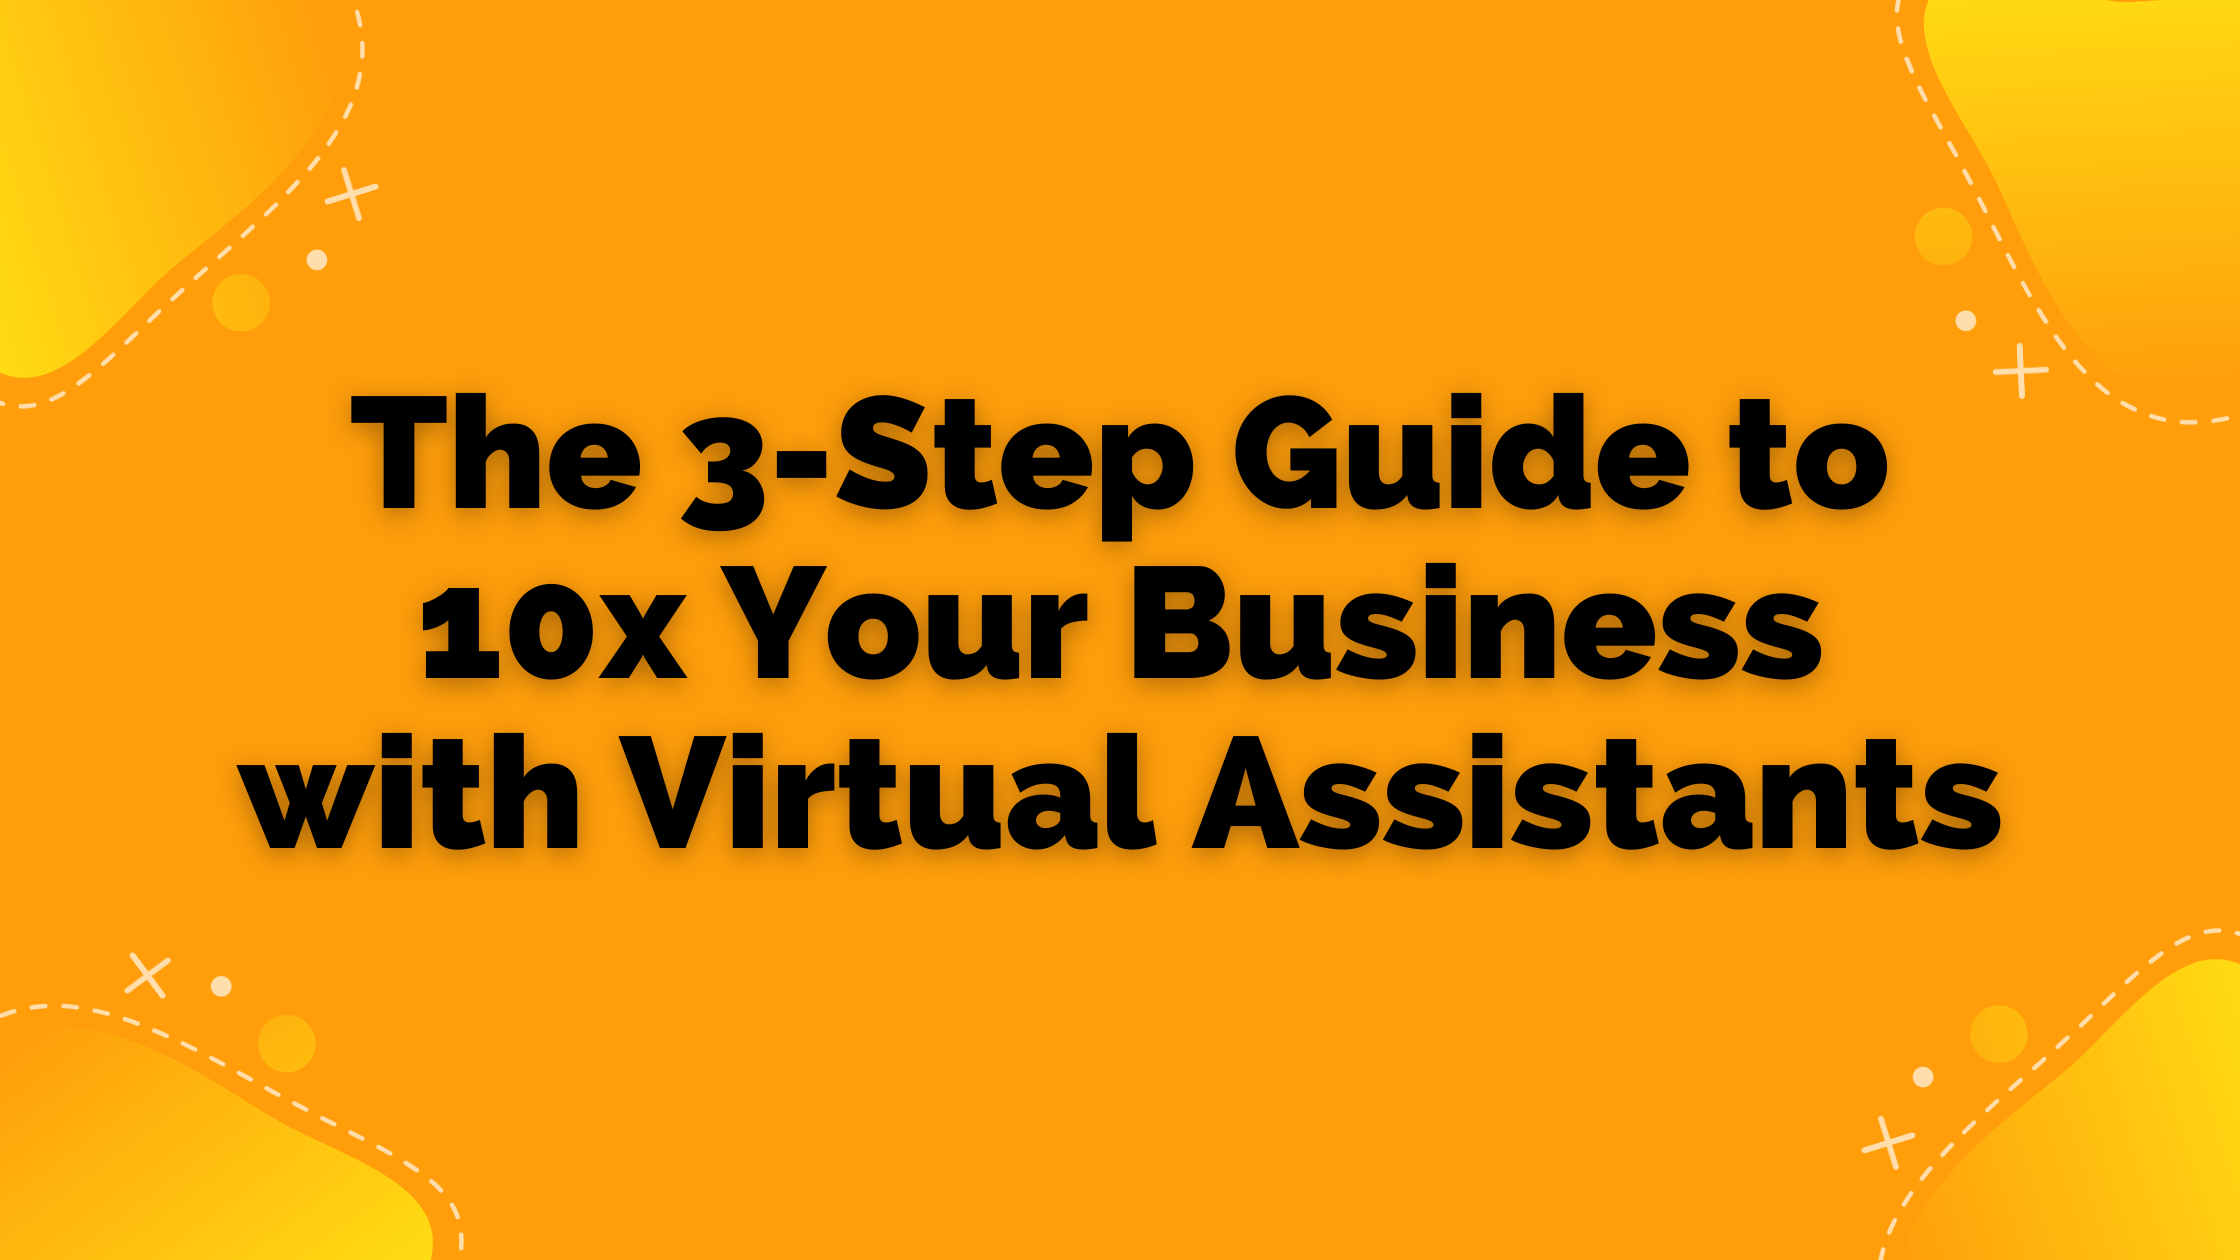 The 3-Step Guide to 10x Your Business with Virtual Assistants